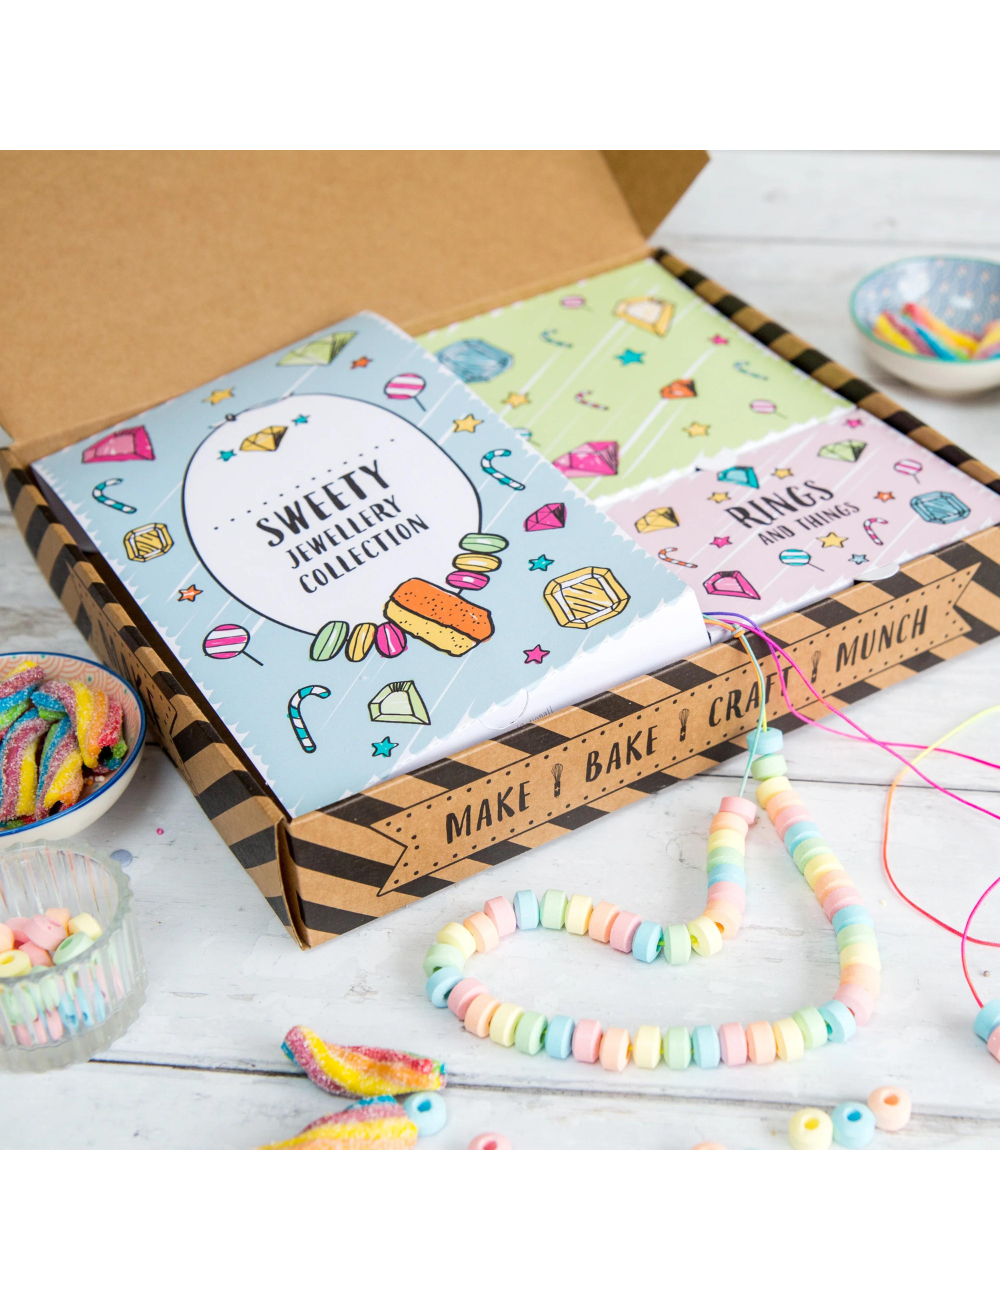 Make Your Own Sweetie Jewellery Activity Kit